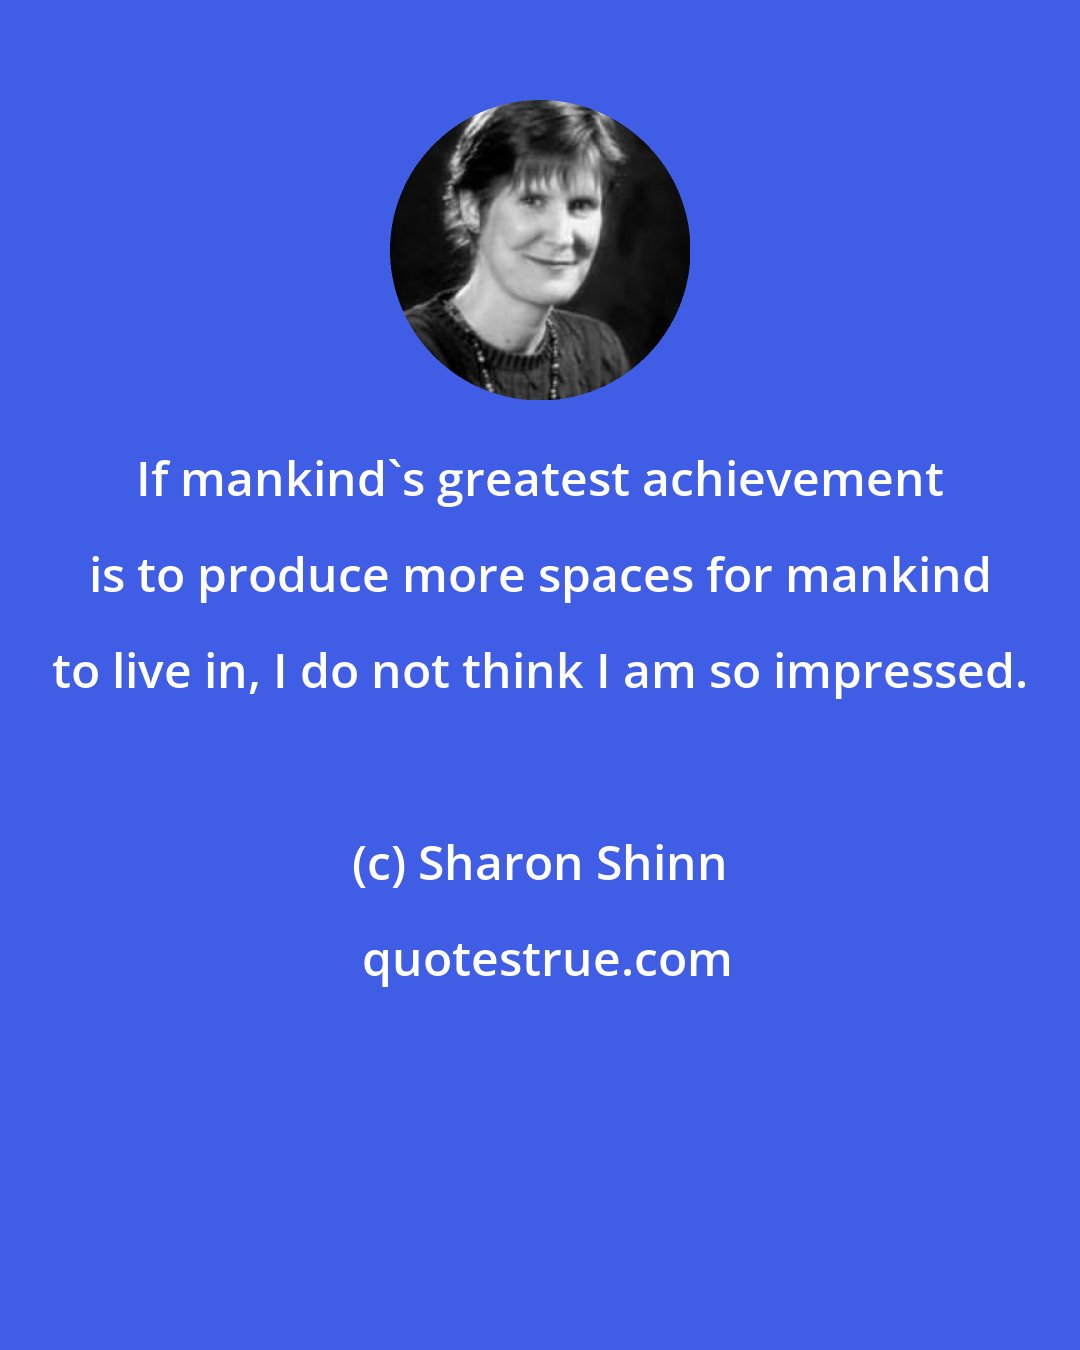 Sharon Shinn: If mankind's greatest achievement is to produce more spaces for mankind to live in, I do not think I am so impressed.